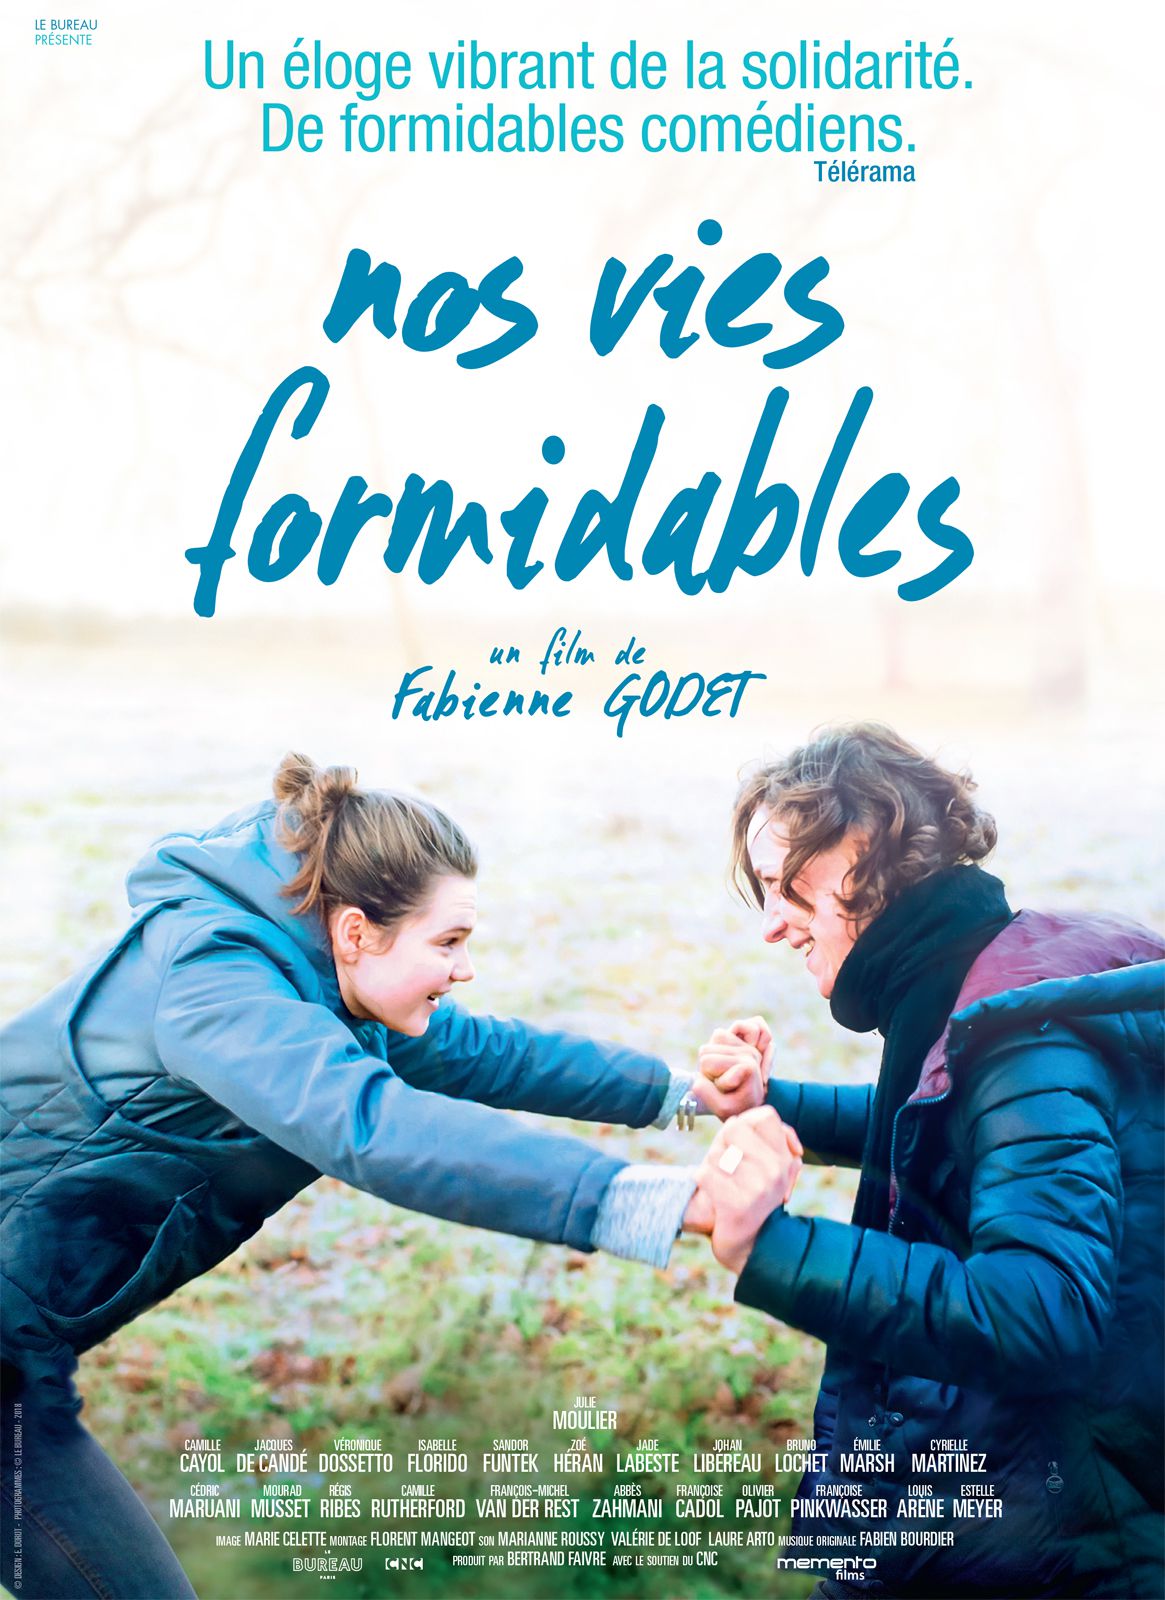 Nos vies formidables - Film (2019) streaming VF gratuit complet